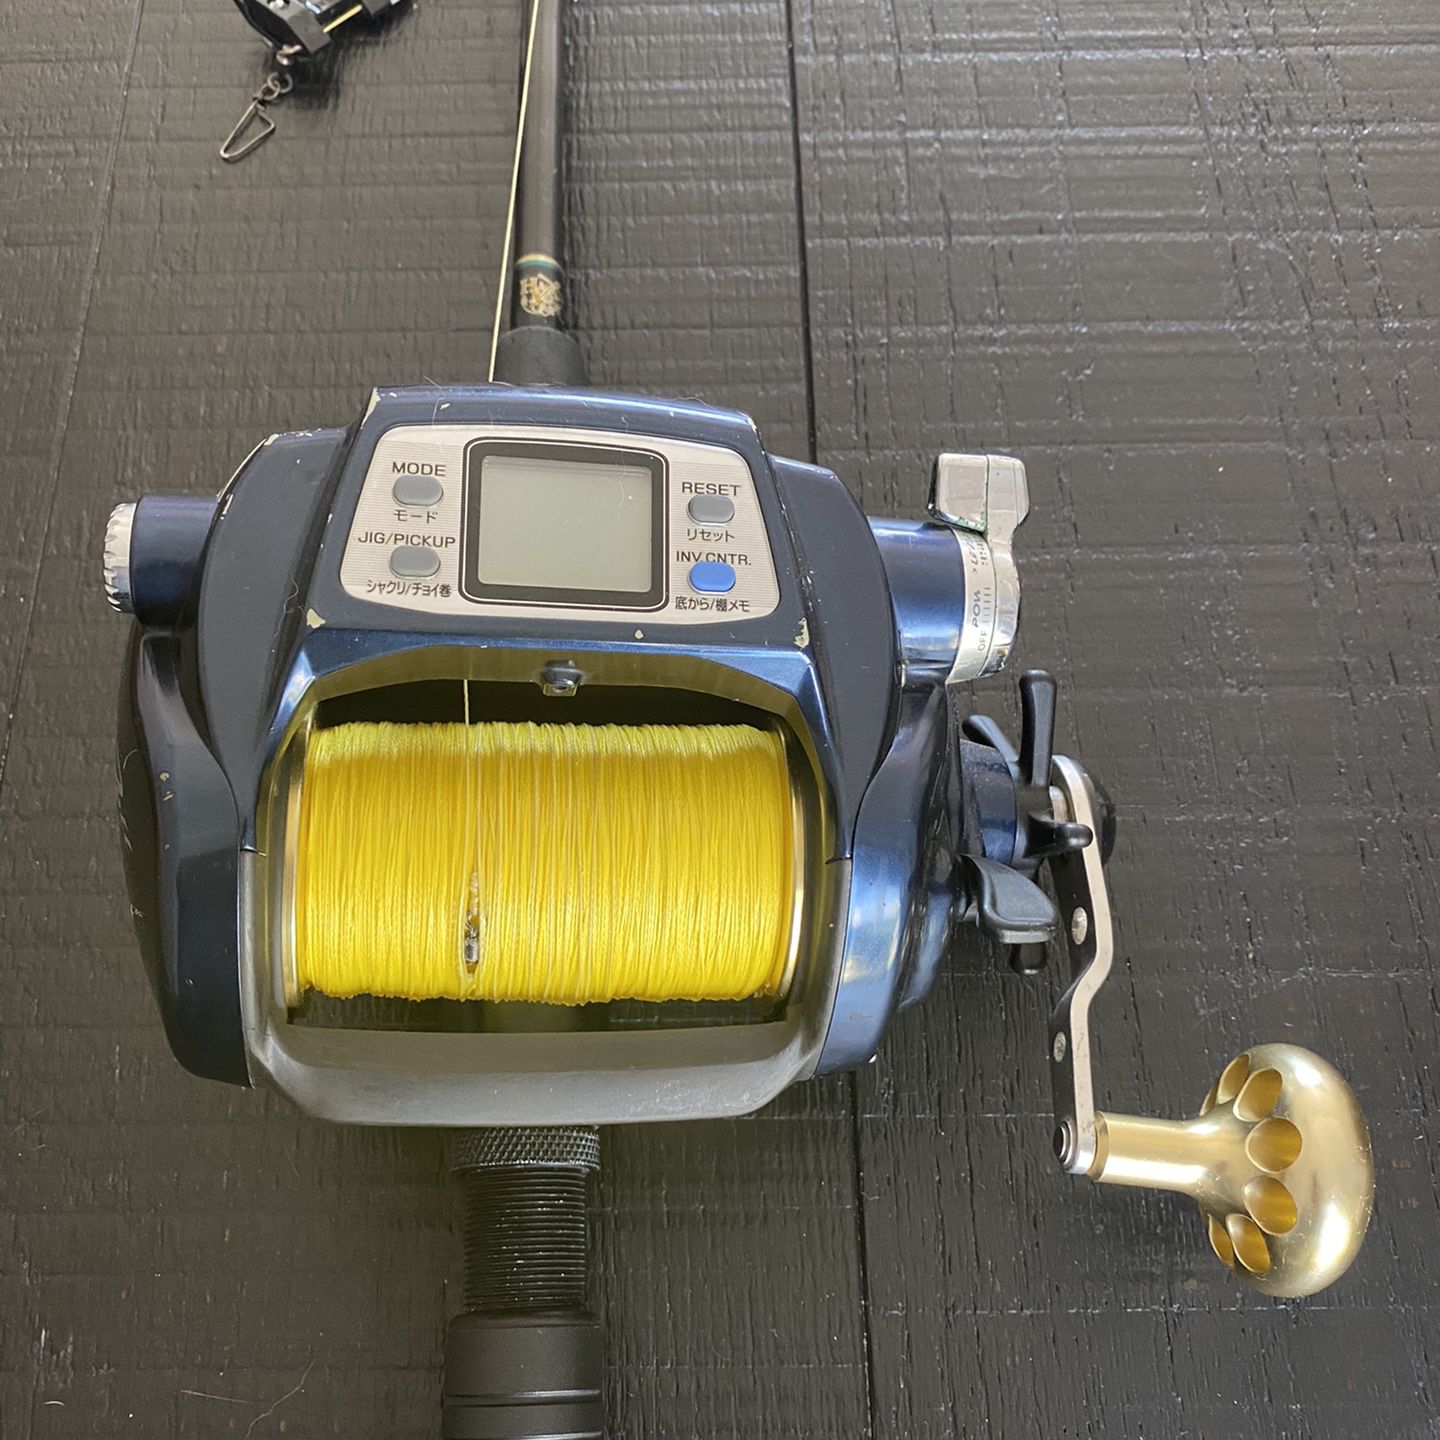 Daiwa Tanacom 1000 Electric Reel with short Hopkins Carter rod used for  Kite Fishing in Florida. Letters and display in reel are in ENGLISH. Packed  wi for Sale in Hollywood, FL - OfferUp